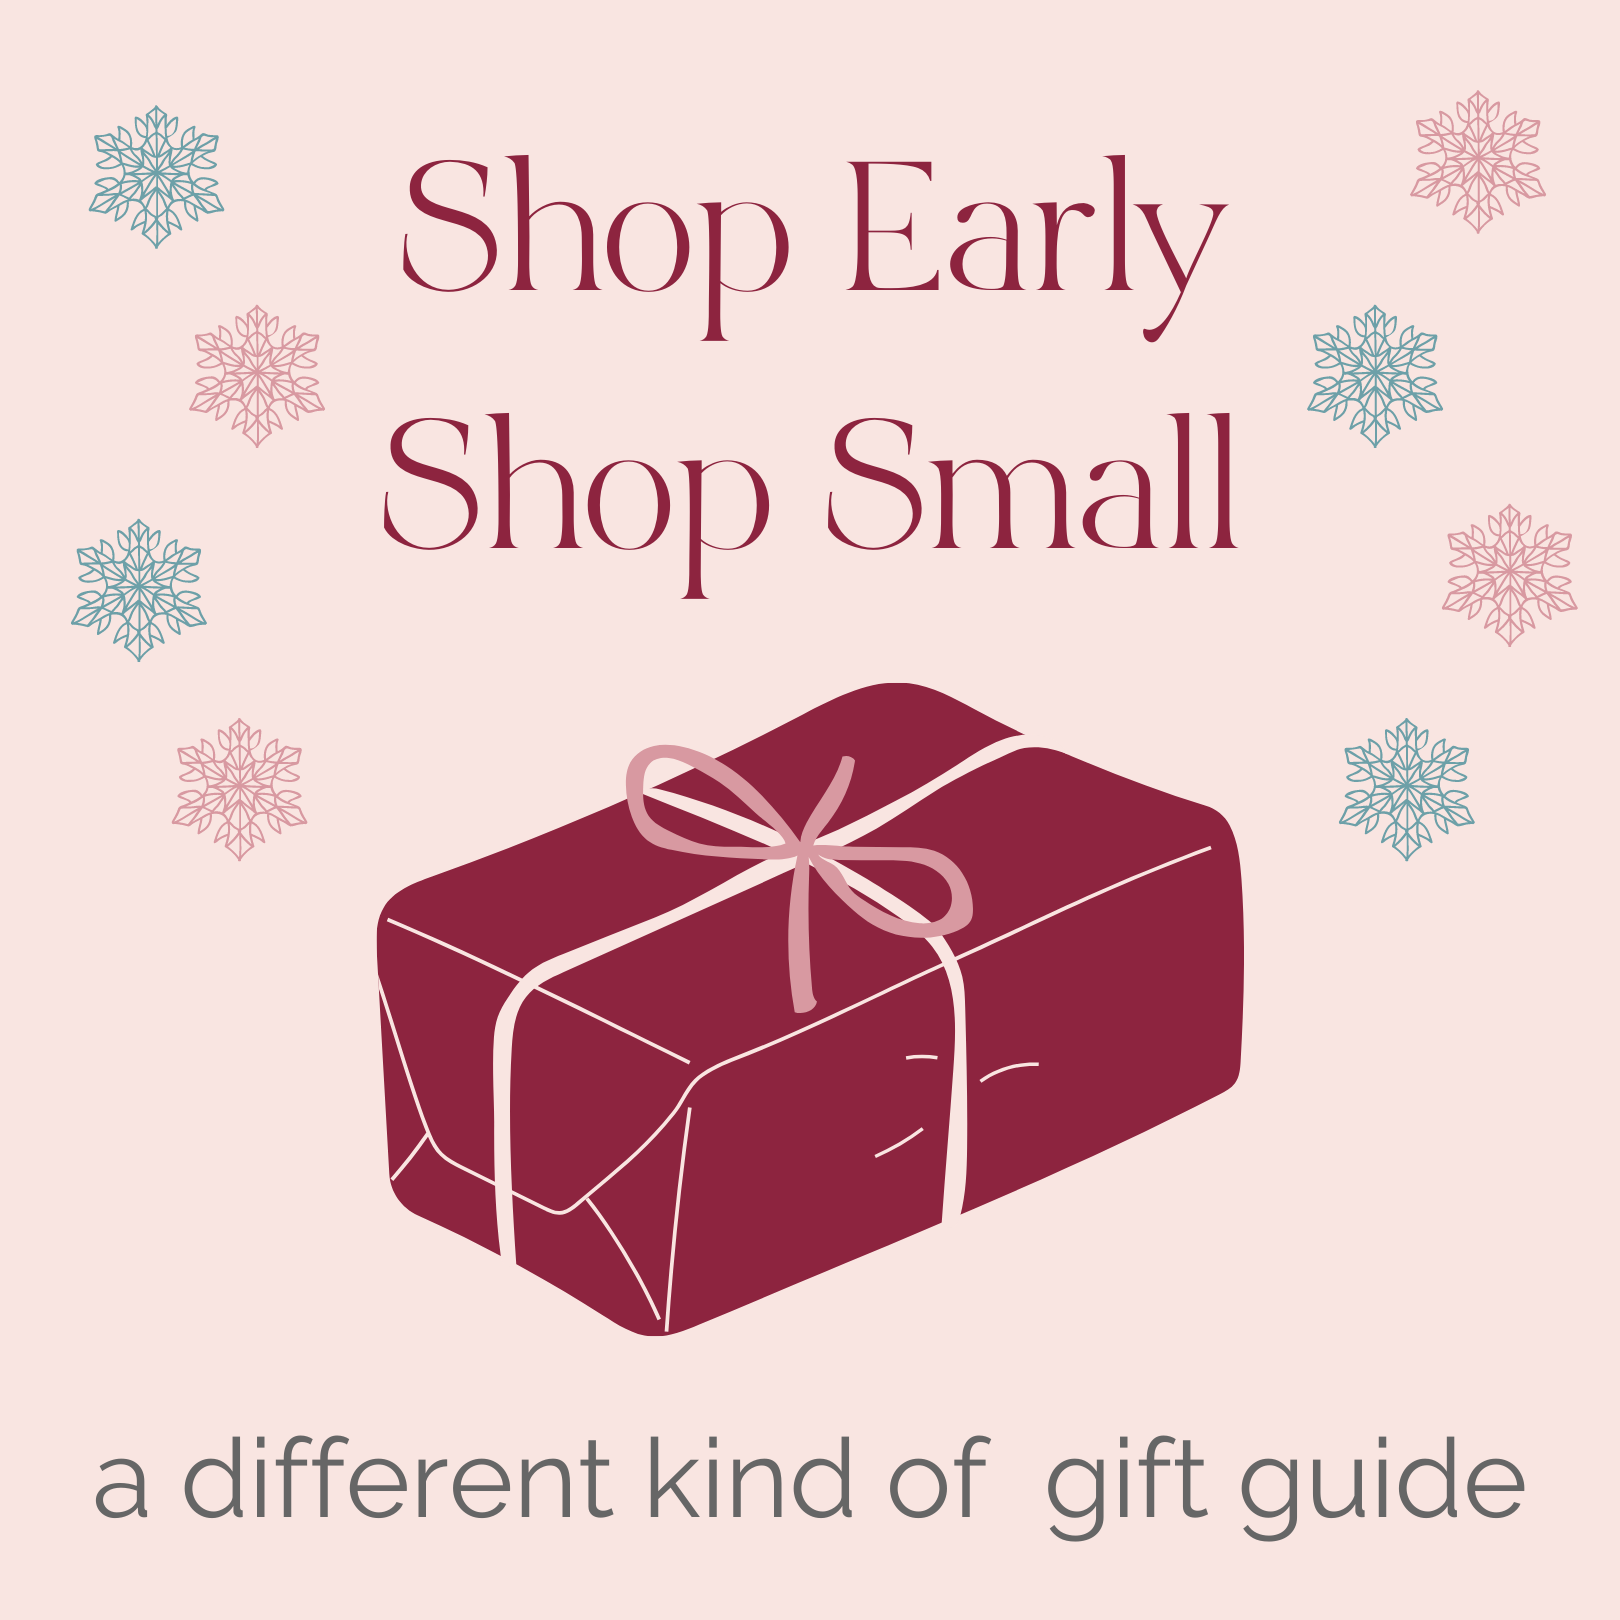 Shop Early. Shop Small. A different kind of gift guide